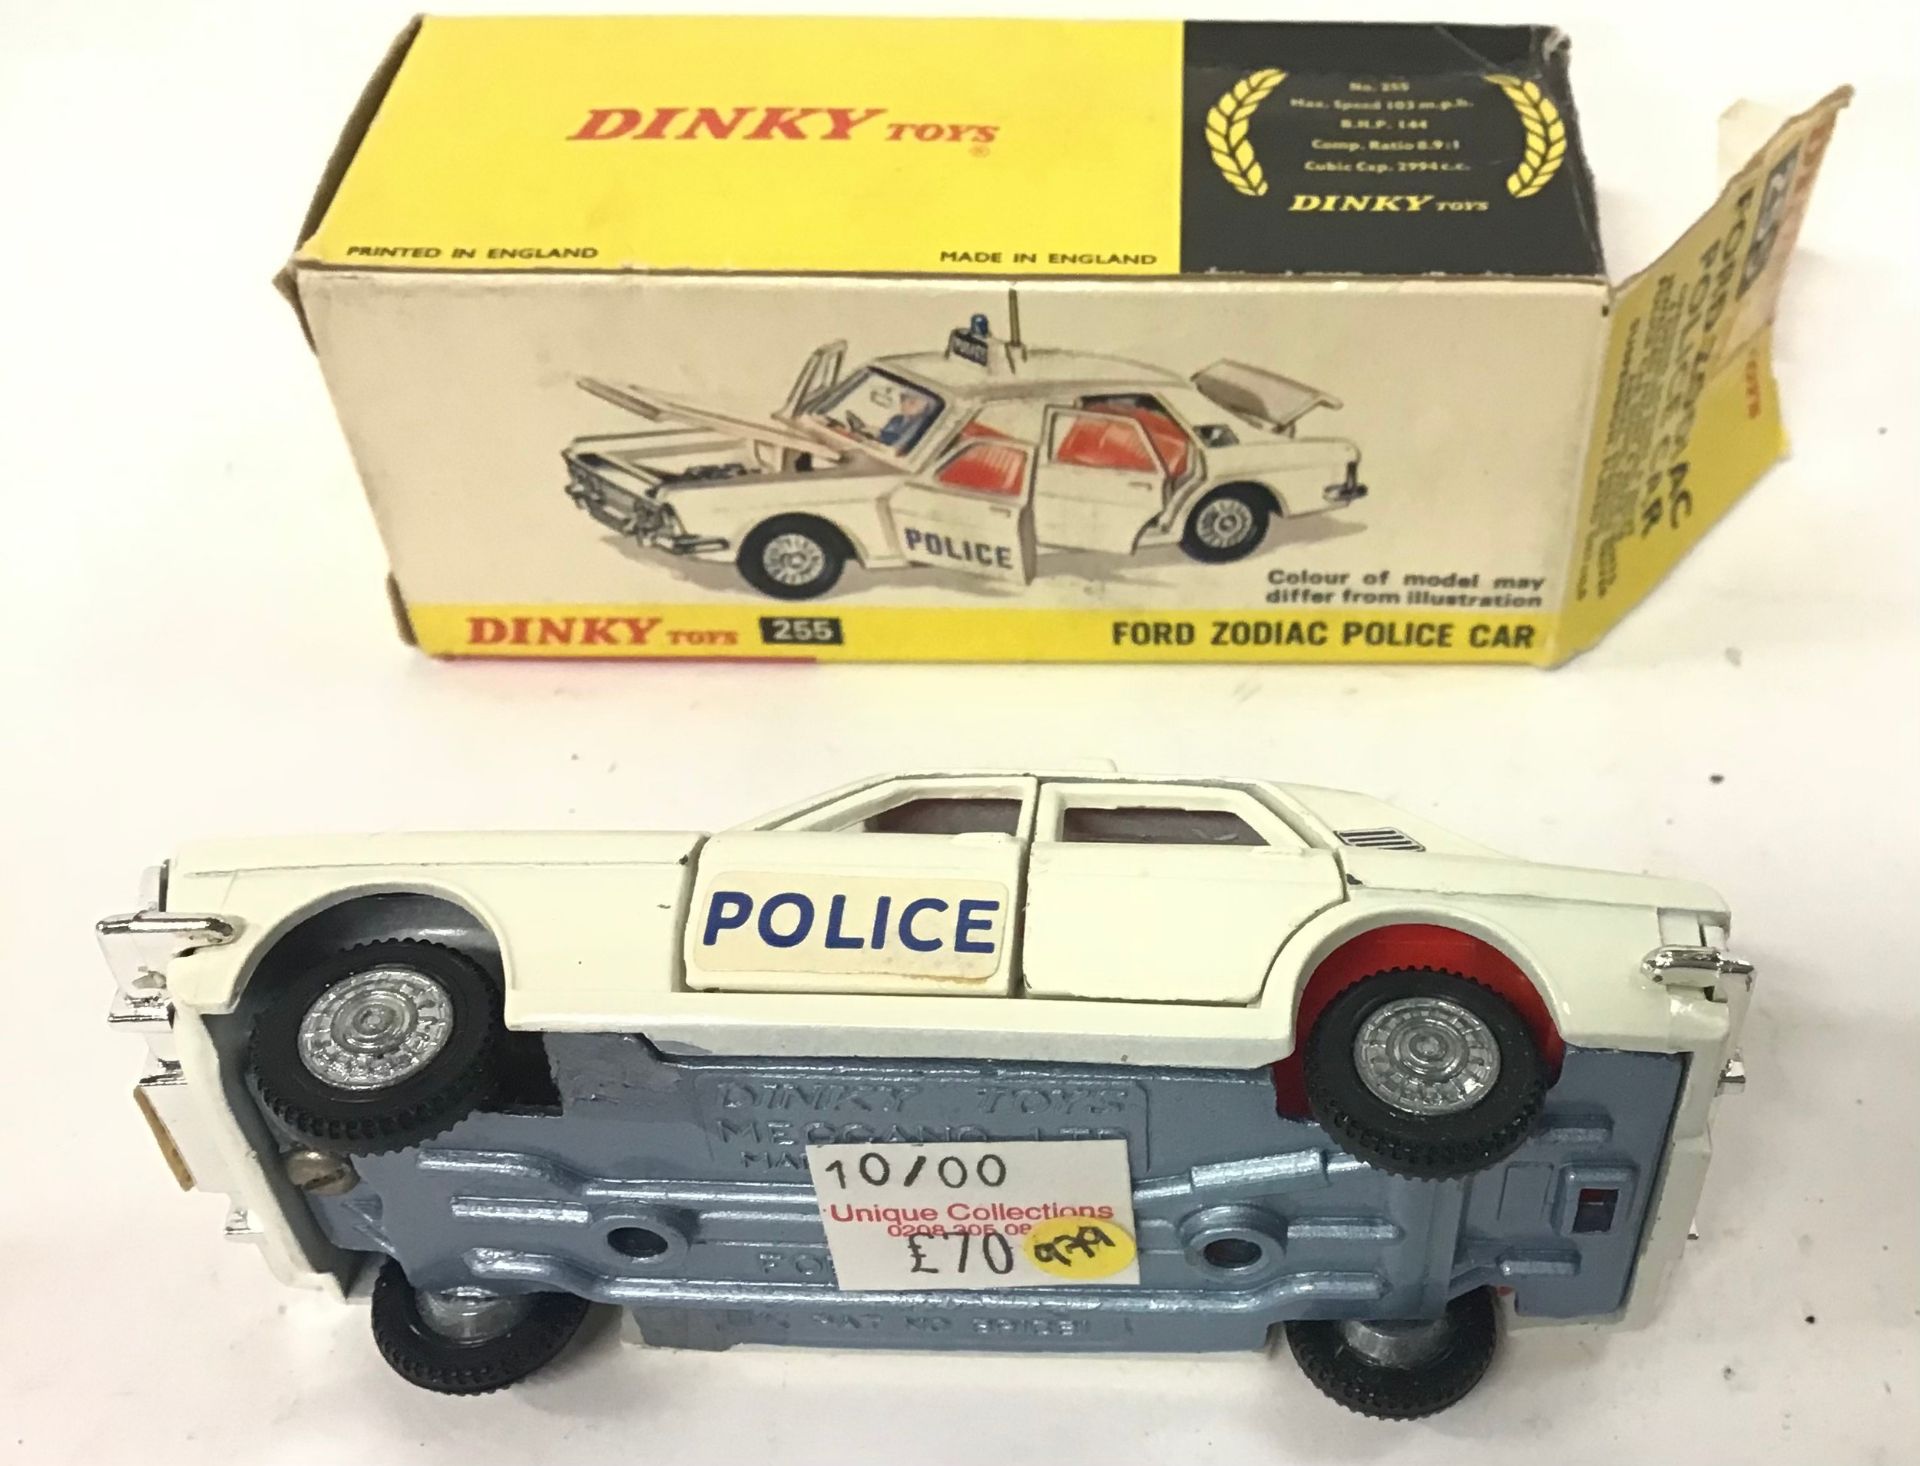 2 Dinky Models: 255 Ford Zodiac "Police" Car - off-white, red interior with figure driver, chrome - Image 3 of 4